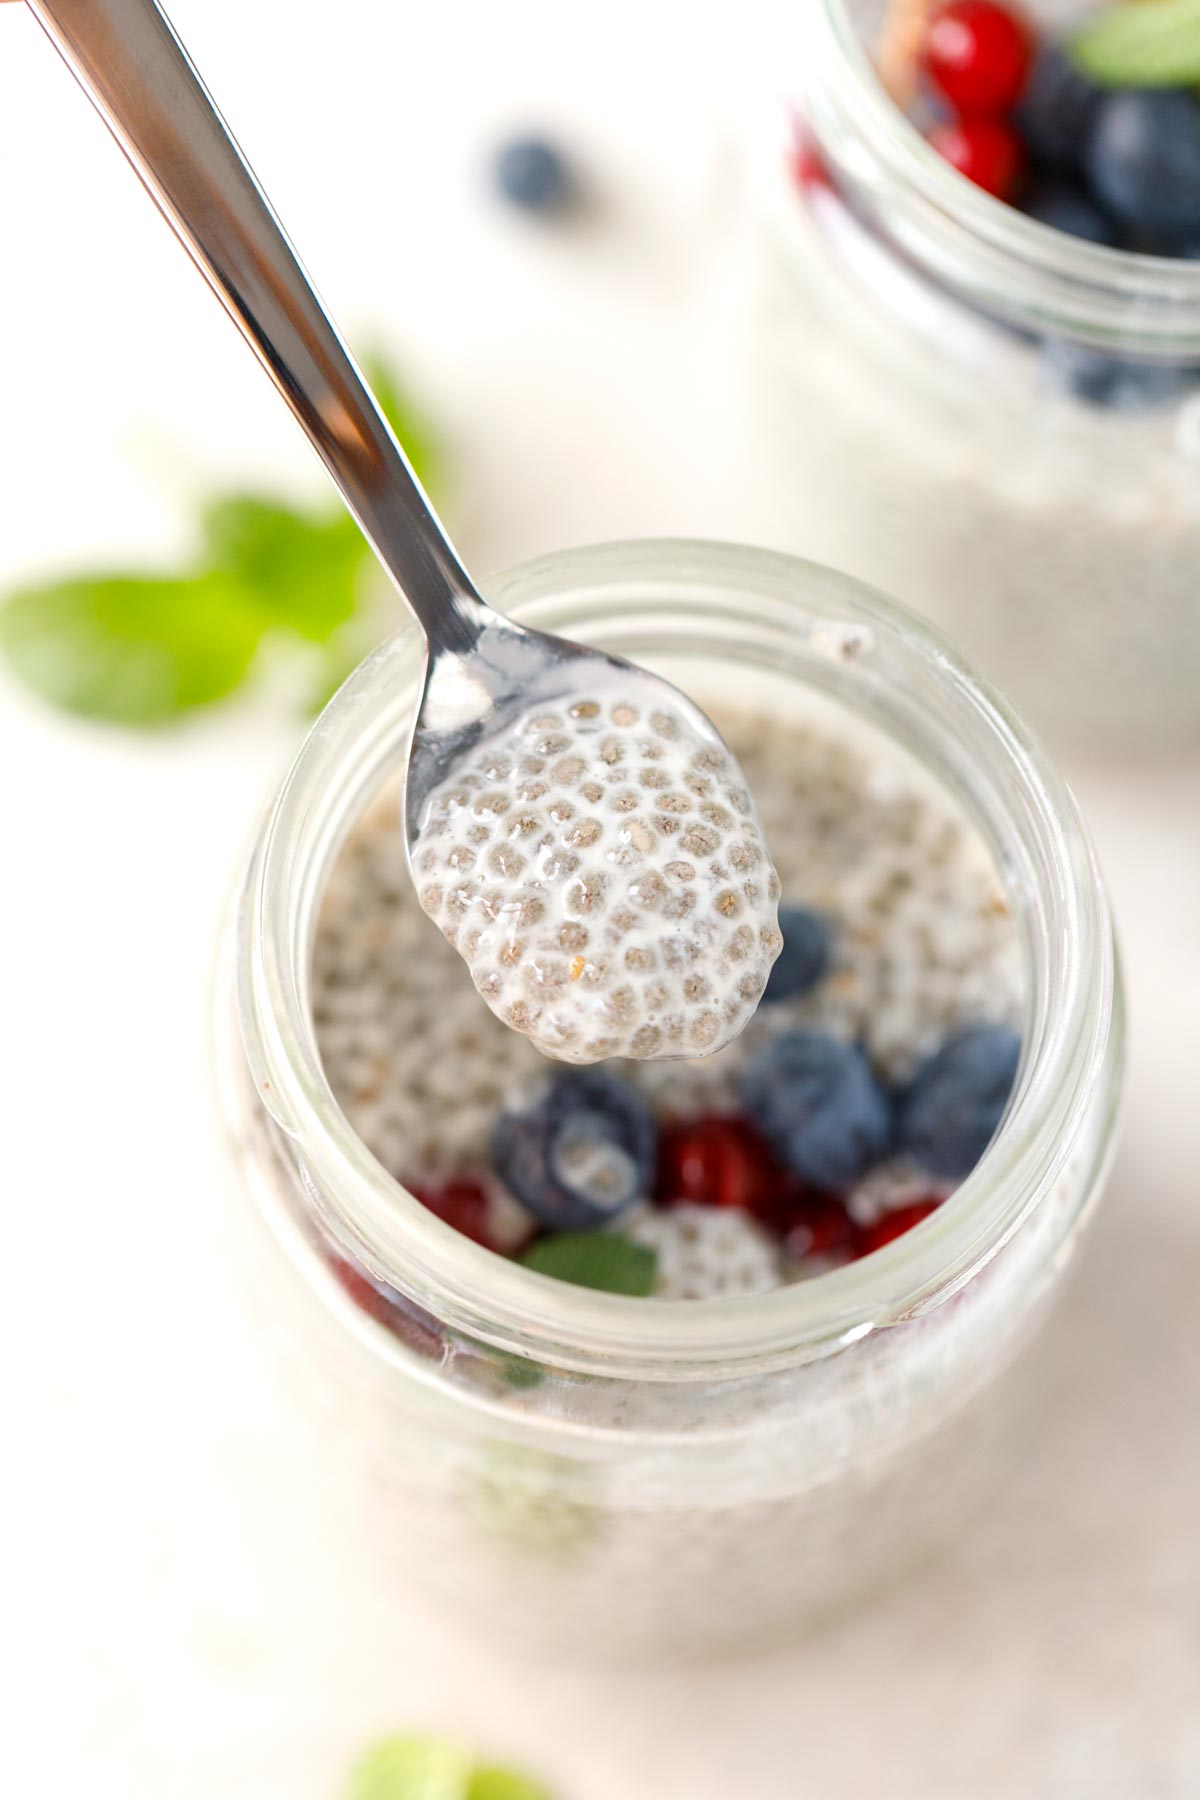 Basic Chia Pudding Recipe With Almond Milk Cooking Lsl